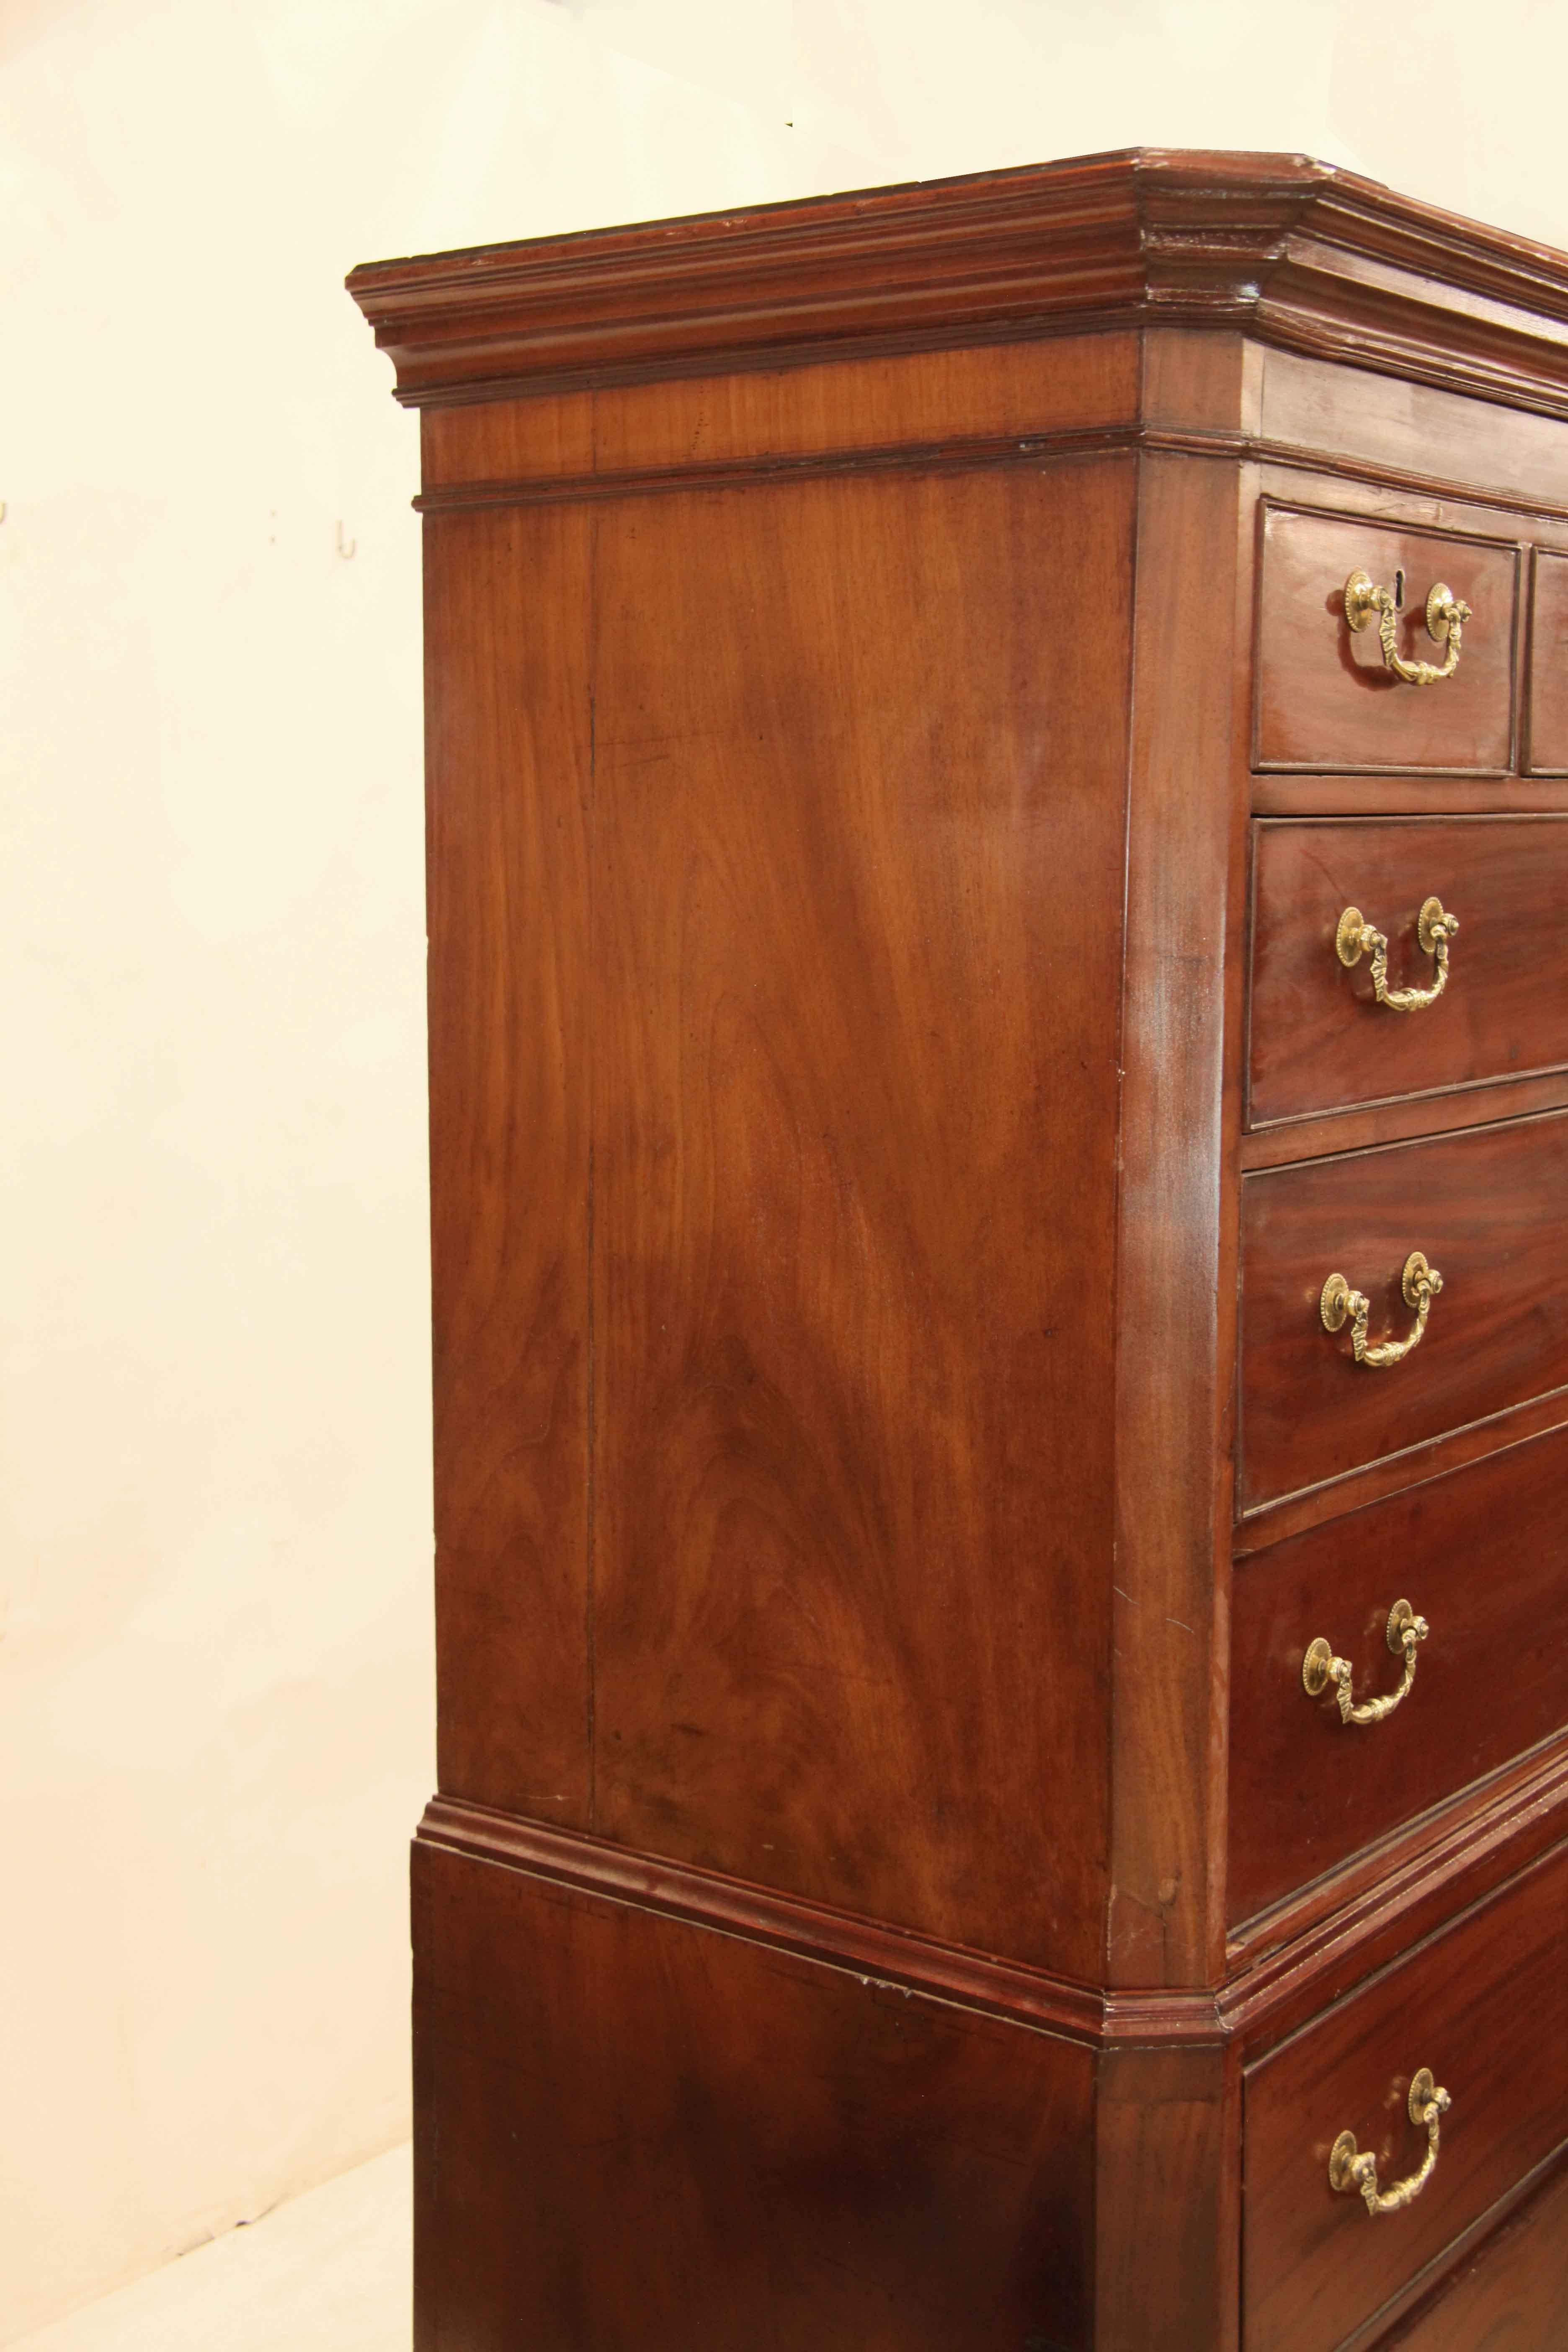 George II chest on chest, with bold cove cornice above bead molding;  the top has three over three graduated drawers, the bottom with three straight graduated drawers.  The ornate bail pulls are original.  This chest has multiple features worthy of